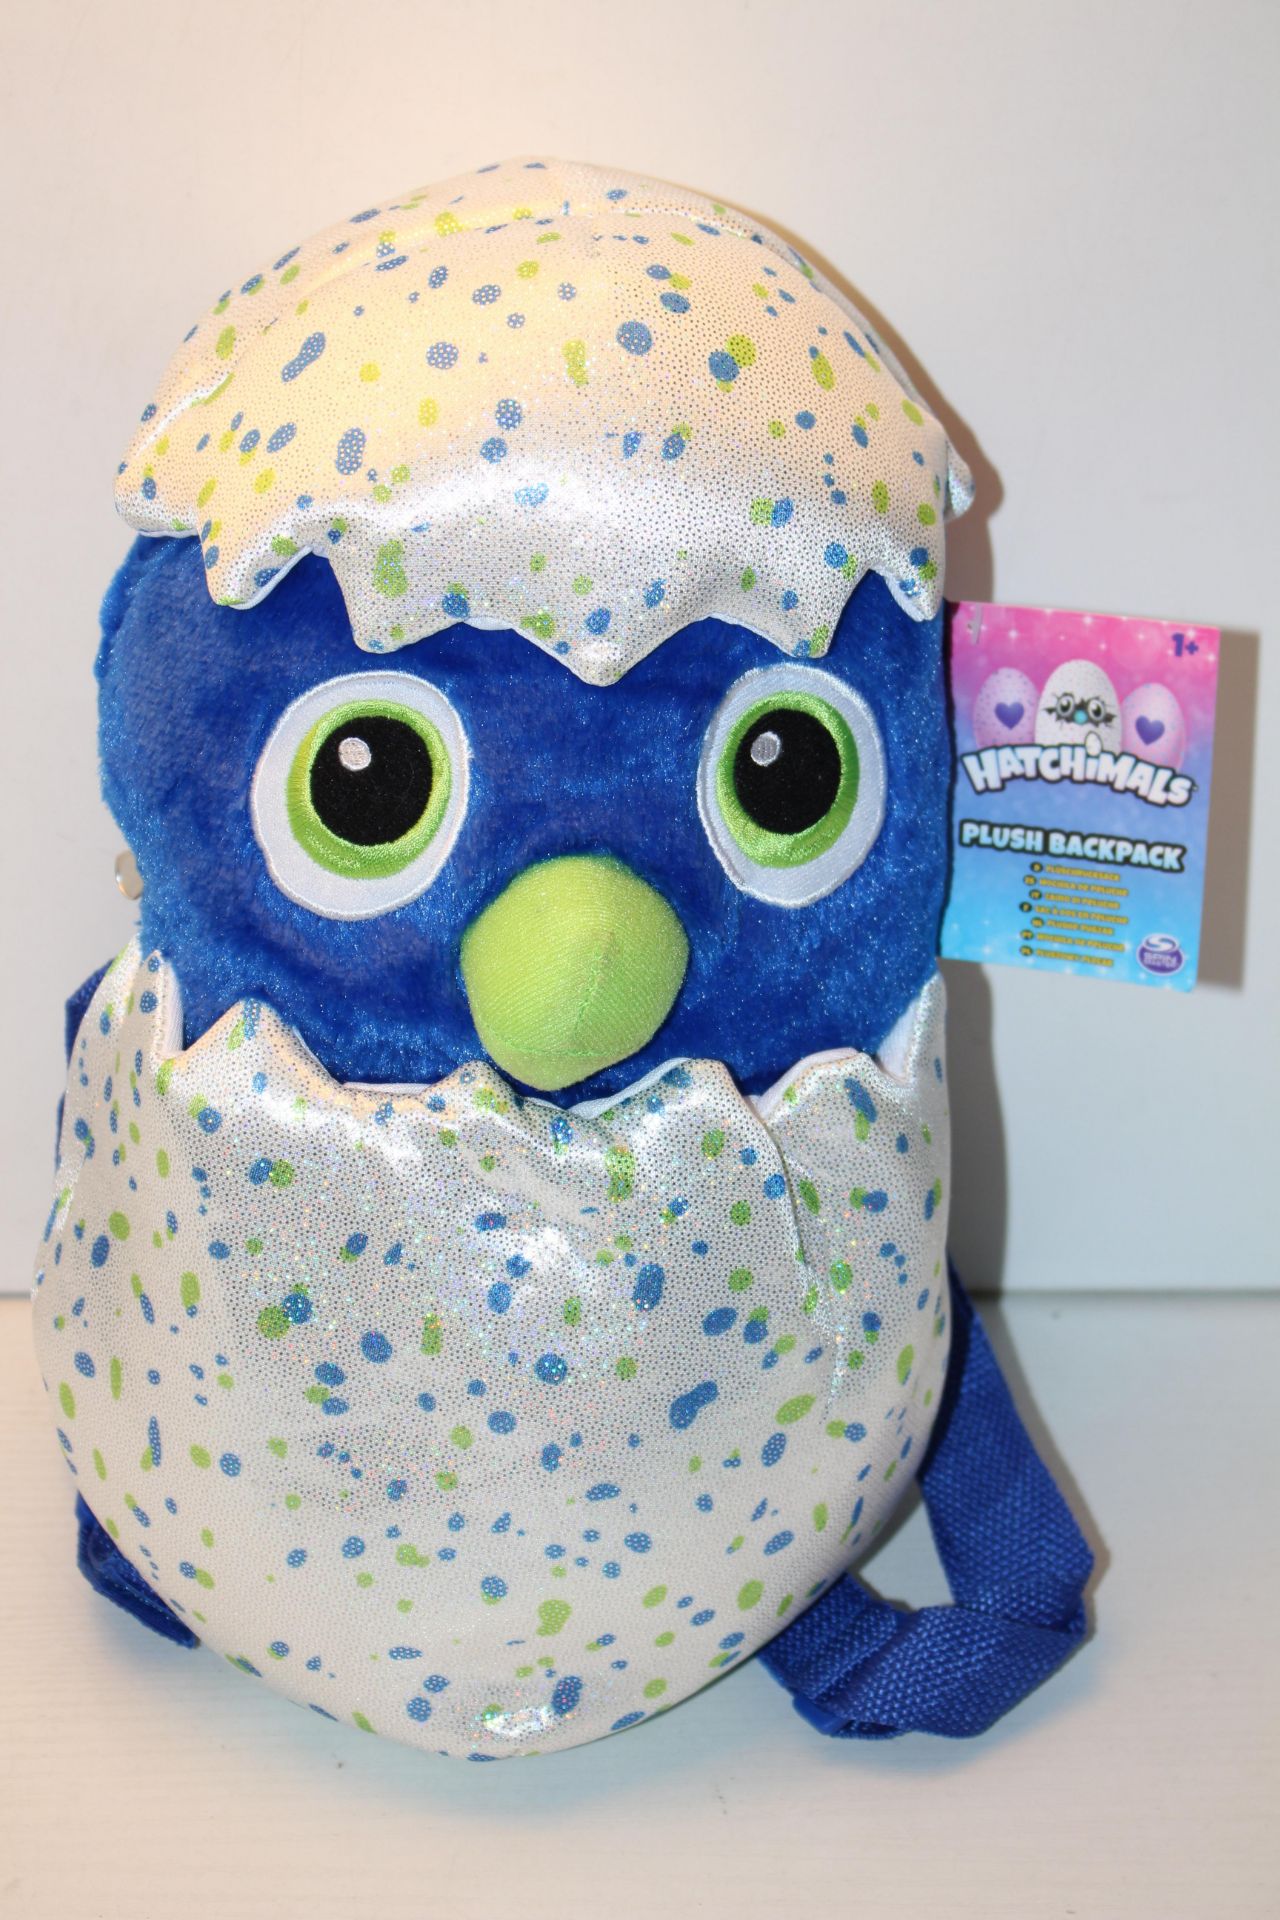 2X UNBOXED WITH TAGS HATCHIMALS PLUSH BACKPACKSCondition ReportAppraisal Available on Request- All